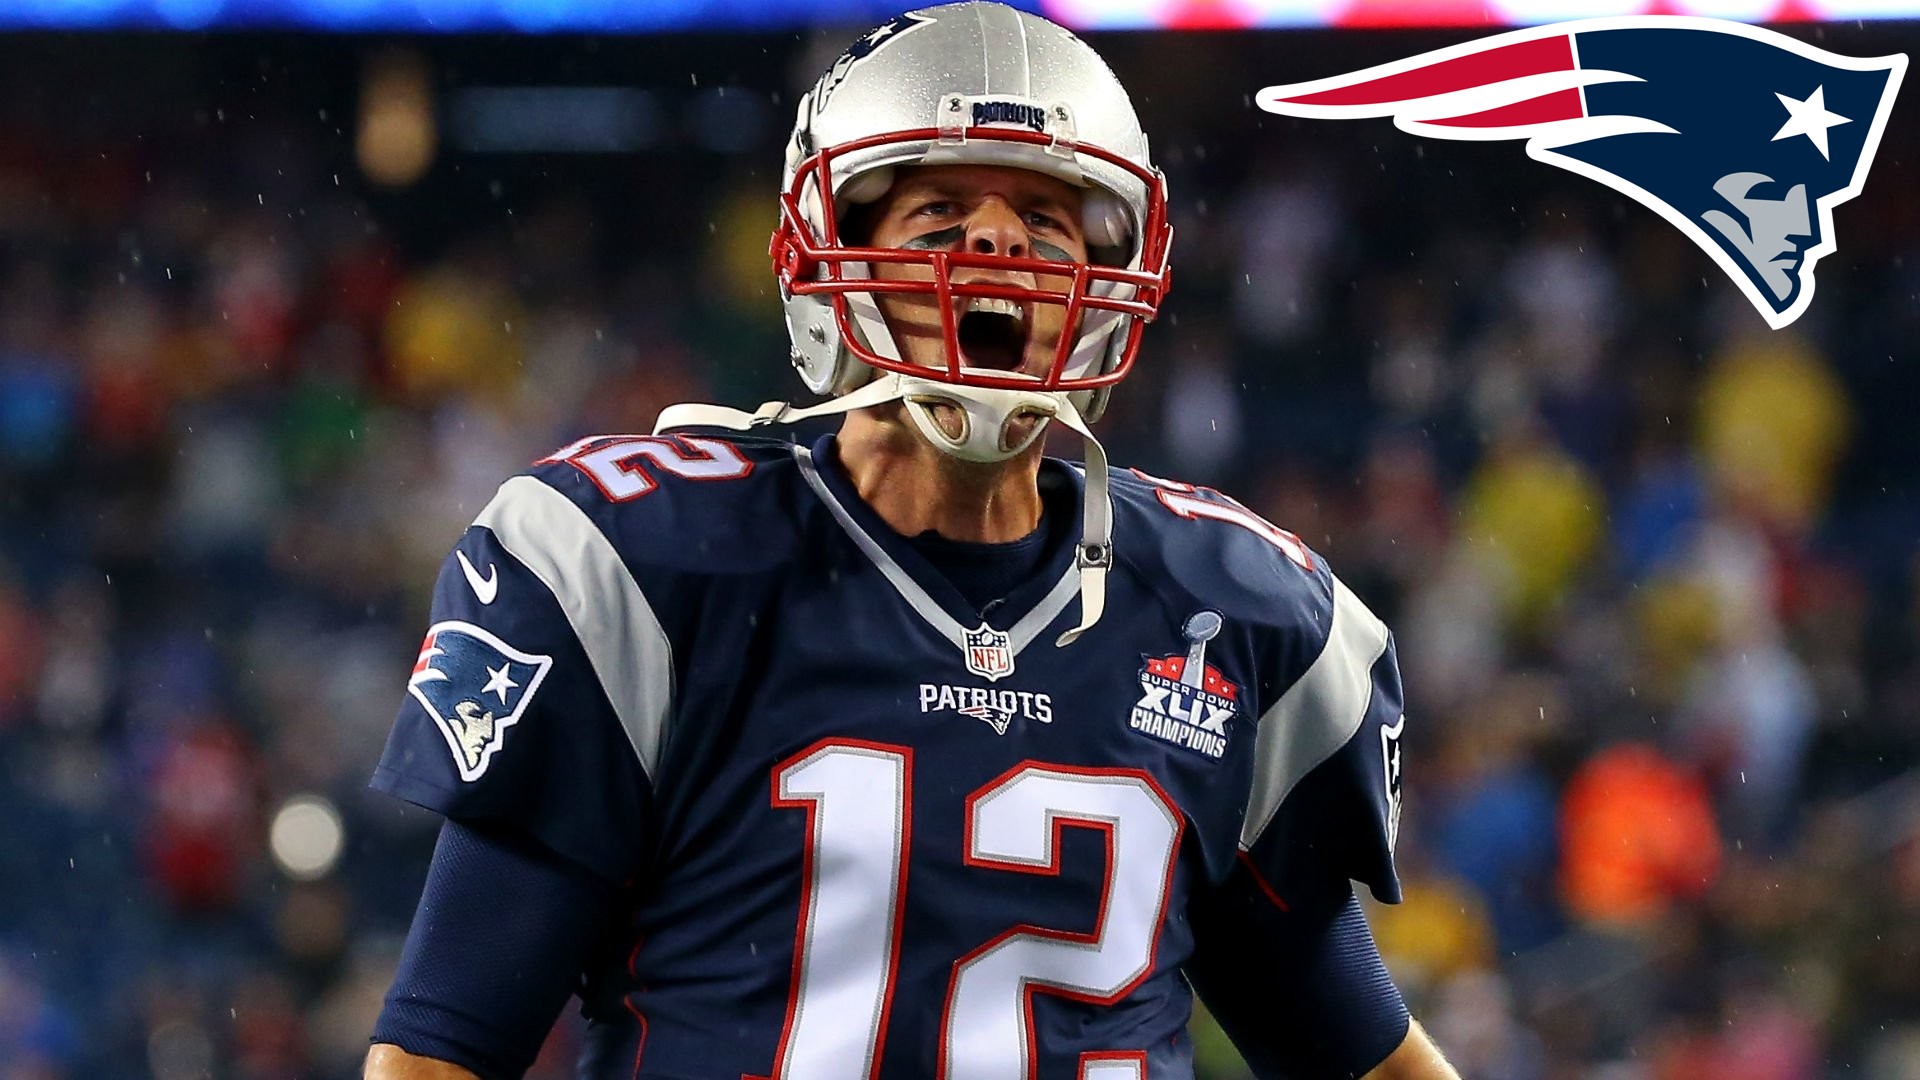 Wallpaper Desktop Tom Brady Super Bowl HD With Resolution 1920X1080 pixel. You can make this wallpaper for your Mac or Windows Desktop Background, iPhone, Android or Tablet and another Smartphone device for free